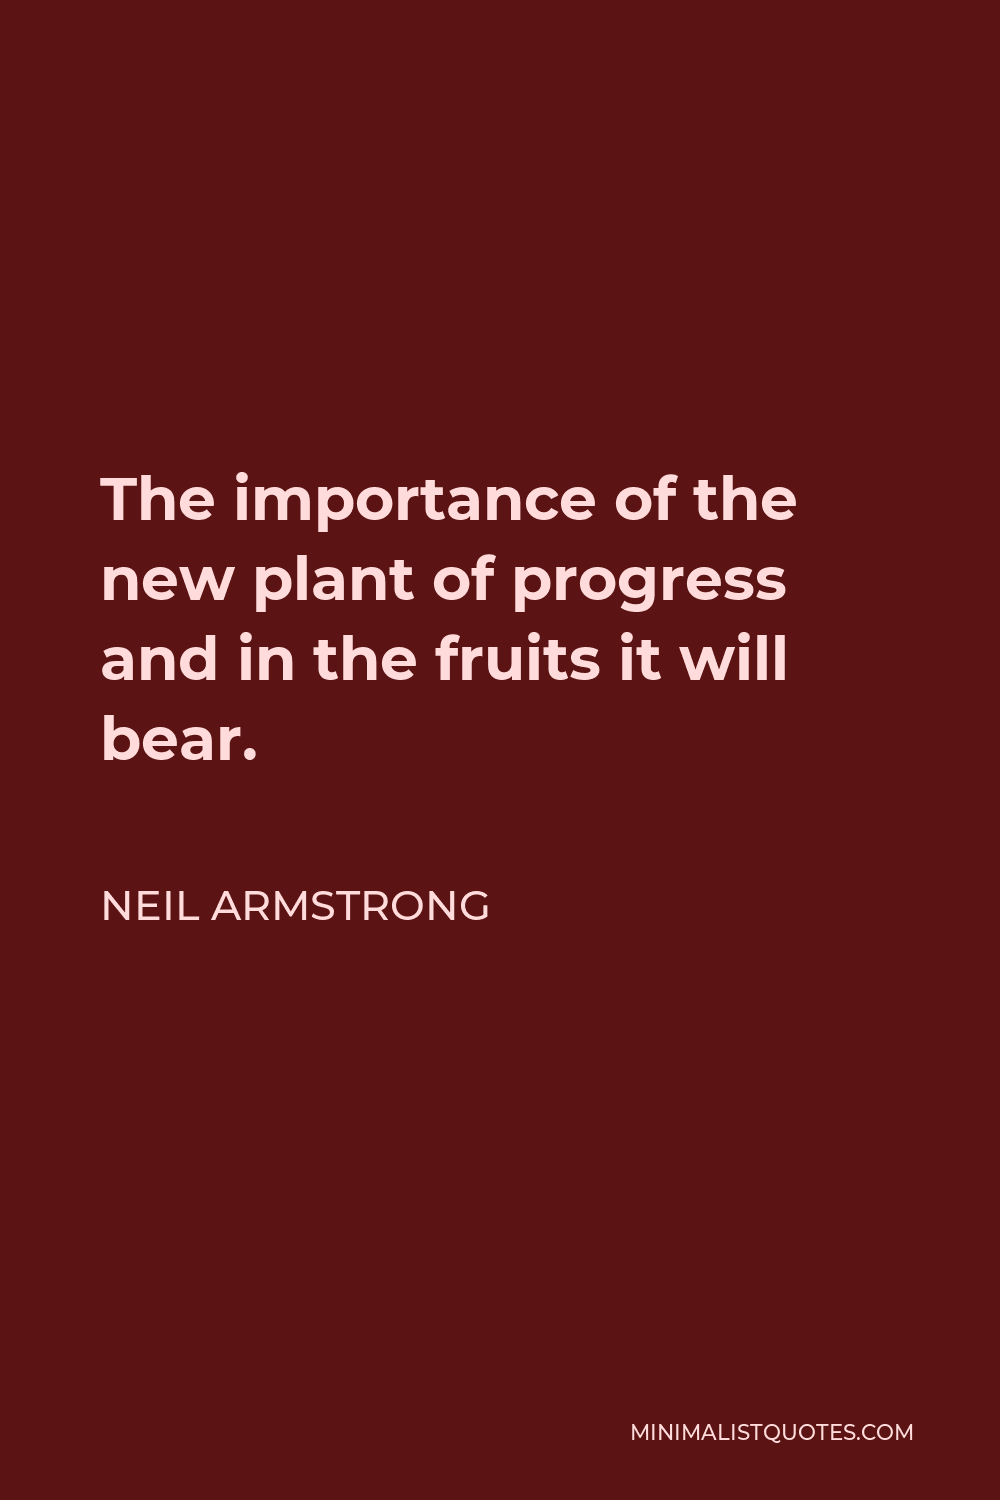 Neil Armstrong Quote - The importance of the new plant of progress and in the fruits it will bear.